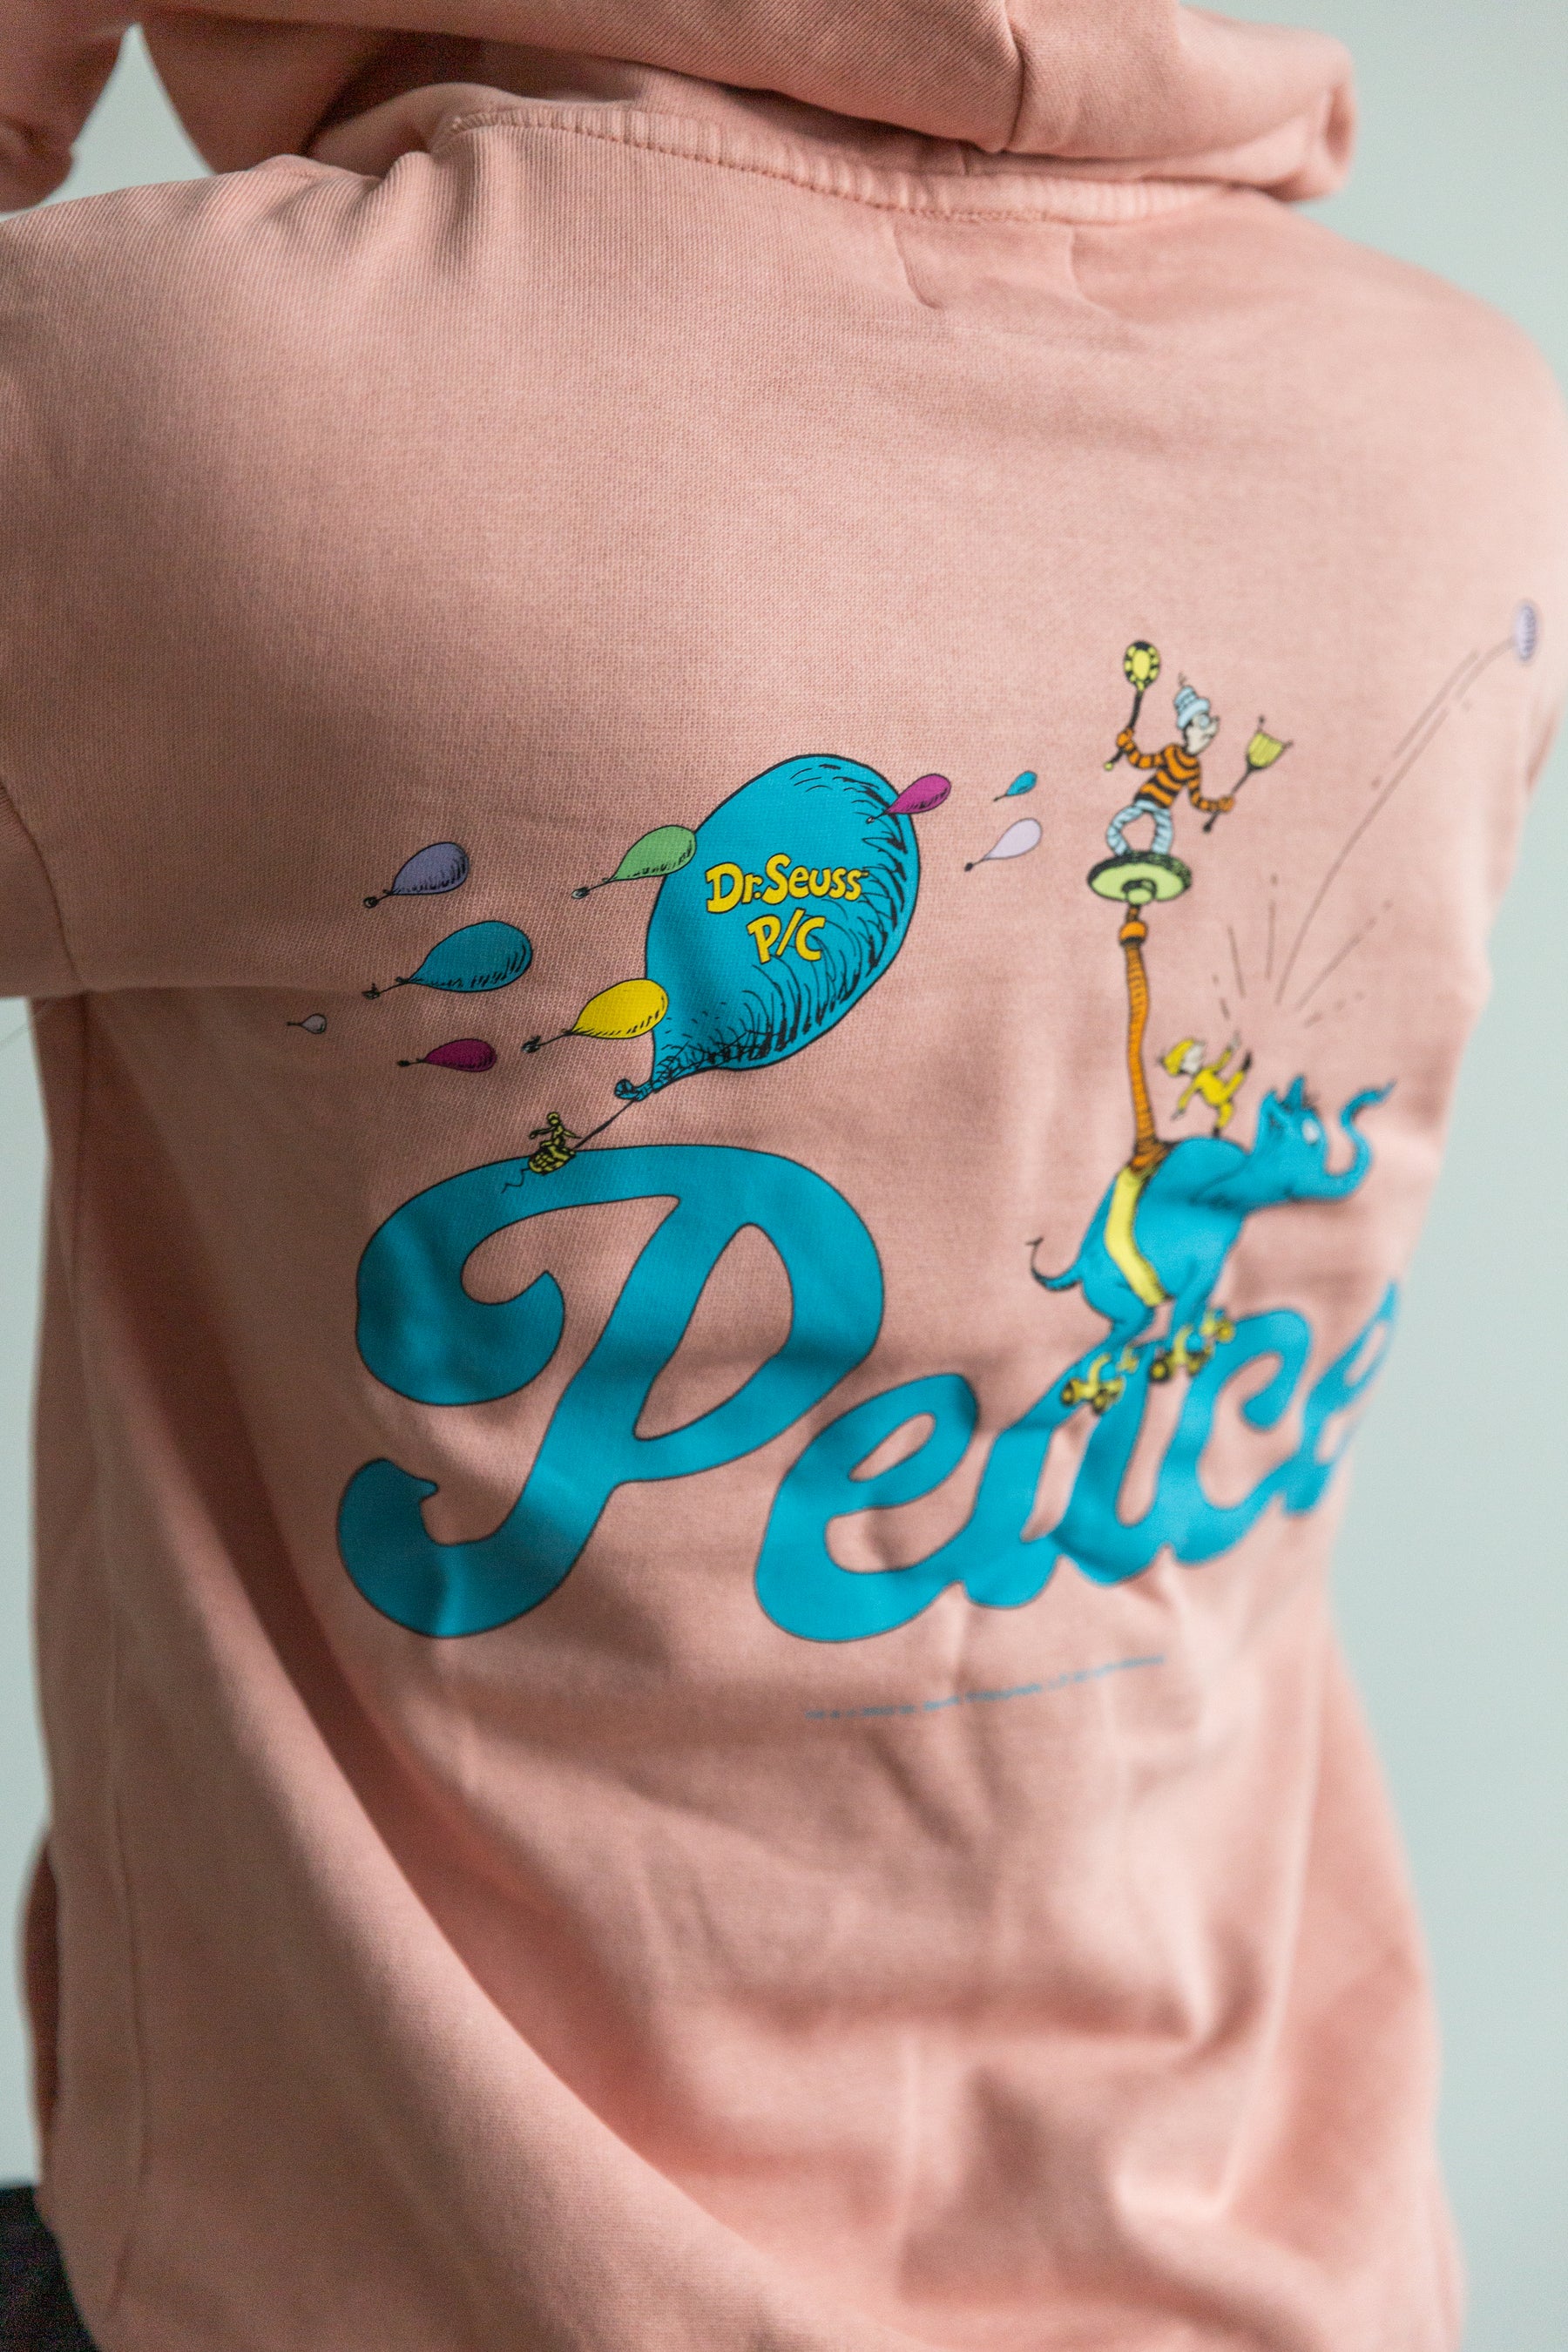 Oh The Places You'll Go Vintage Character Hoodie - Pink